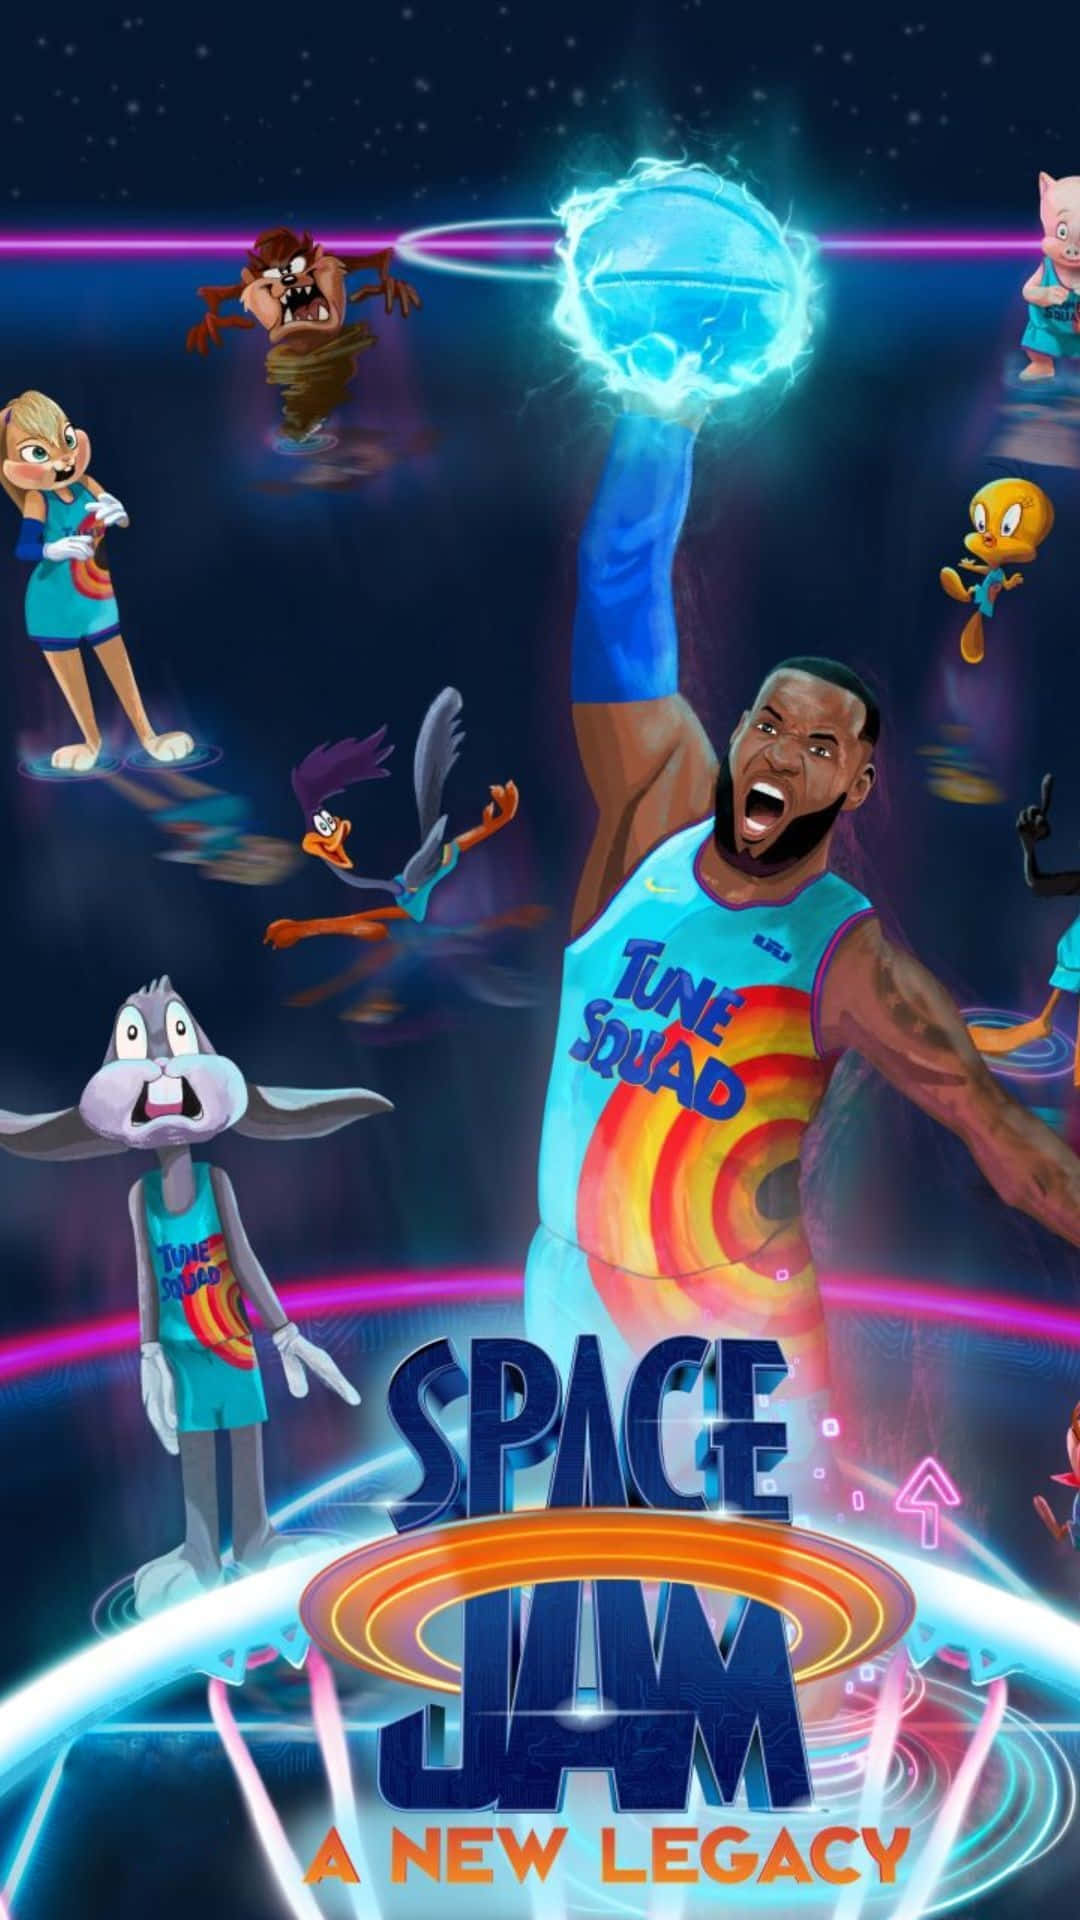 Featuring LeBron James, Bugs Bunny and the Tune Squad from Space Jam: A New Legacy Wallpaper